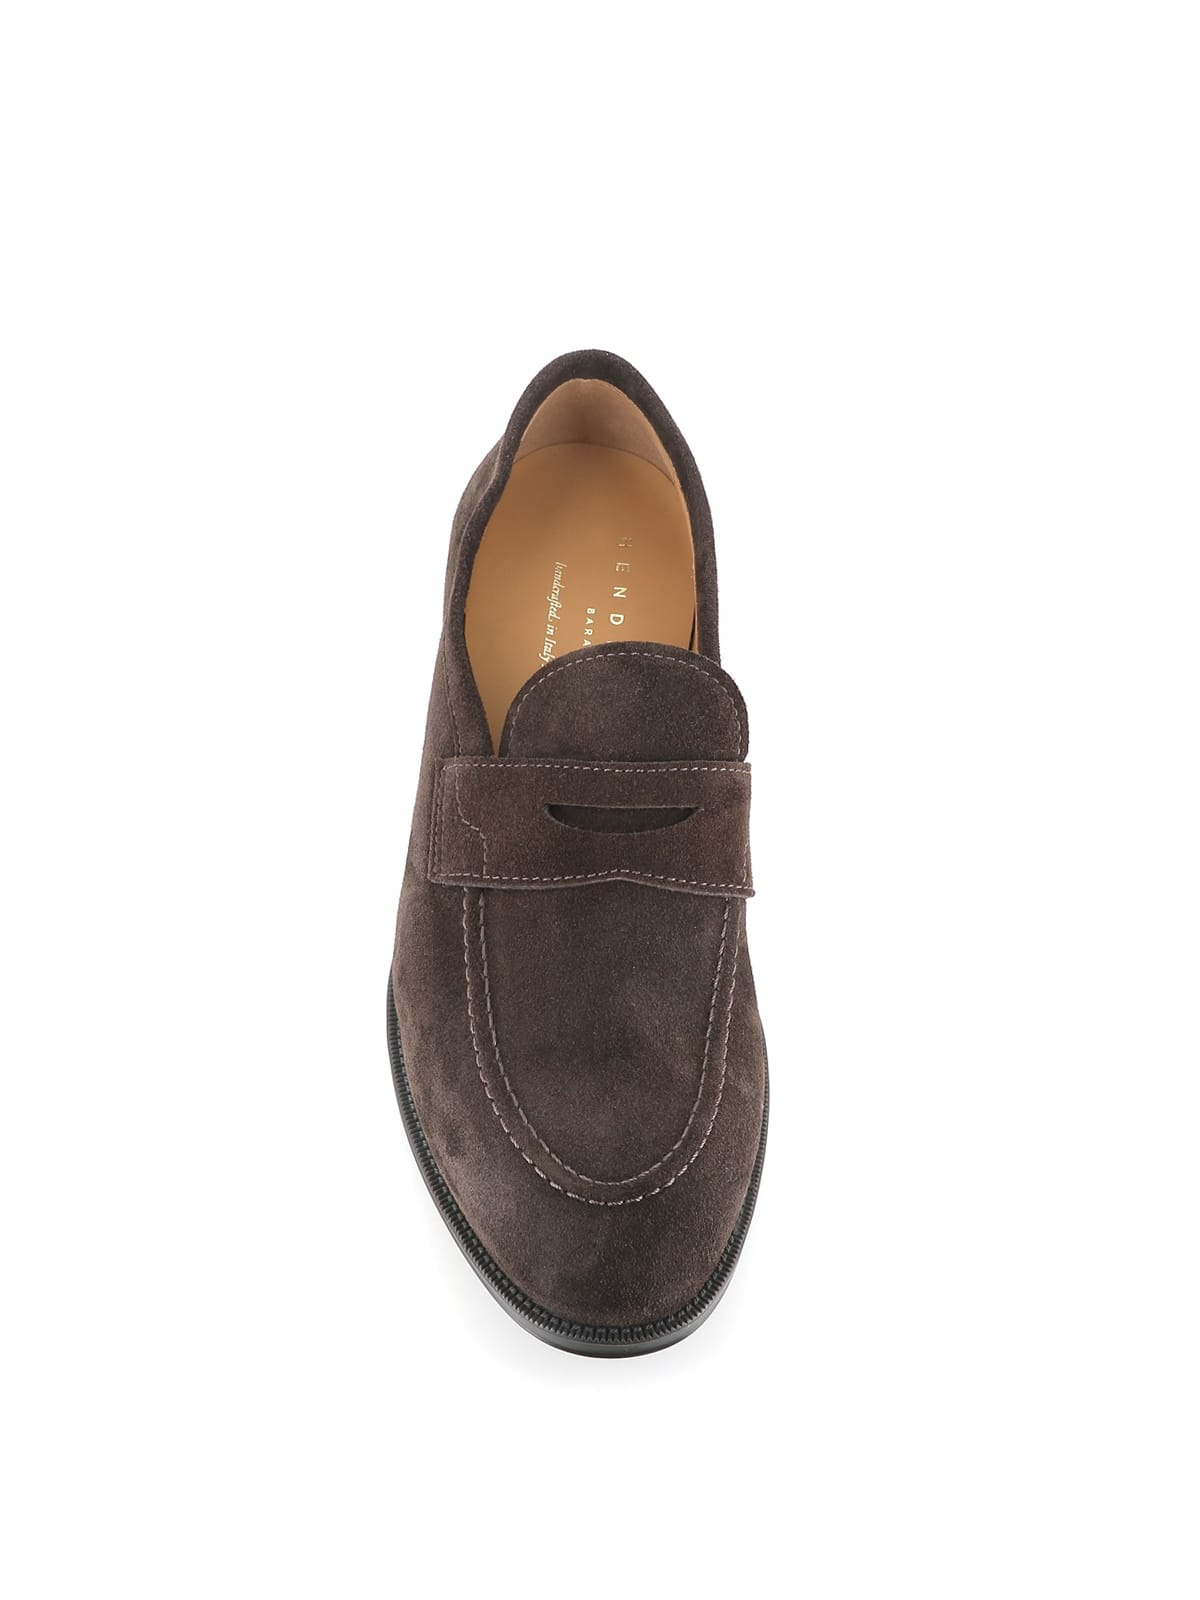 Henderson Baracco tassel-detail leather loafers - Brown